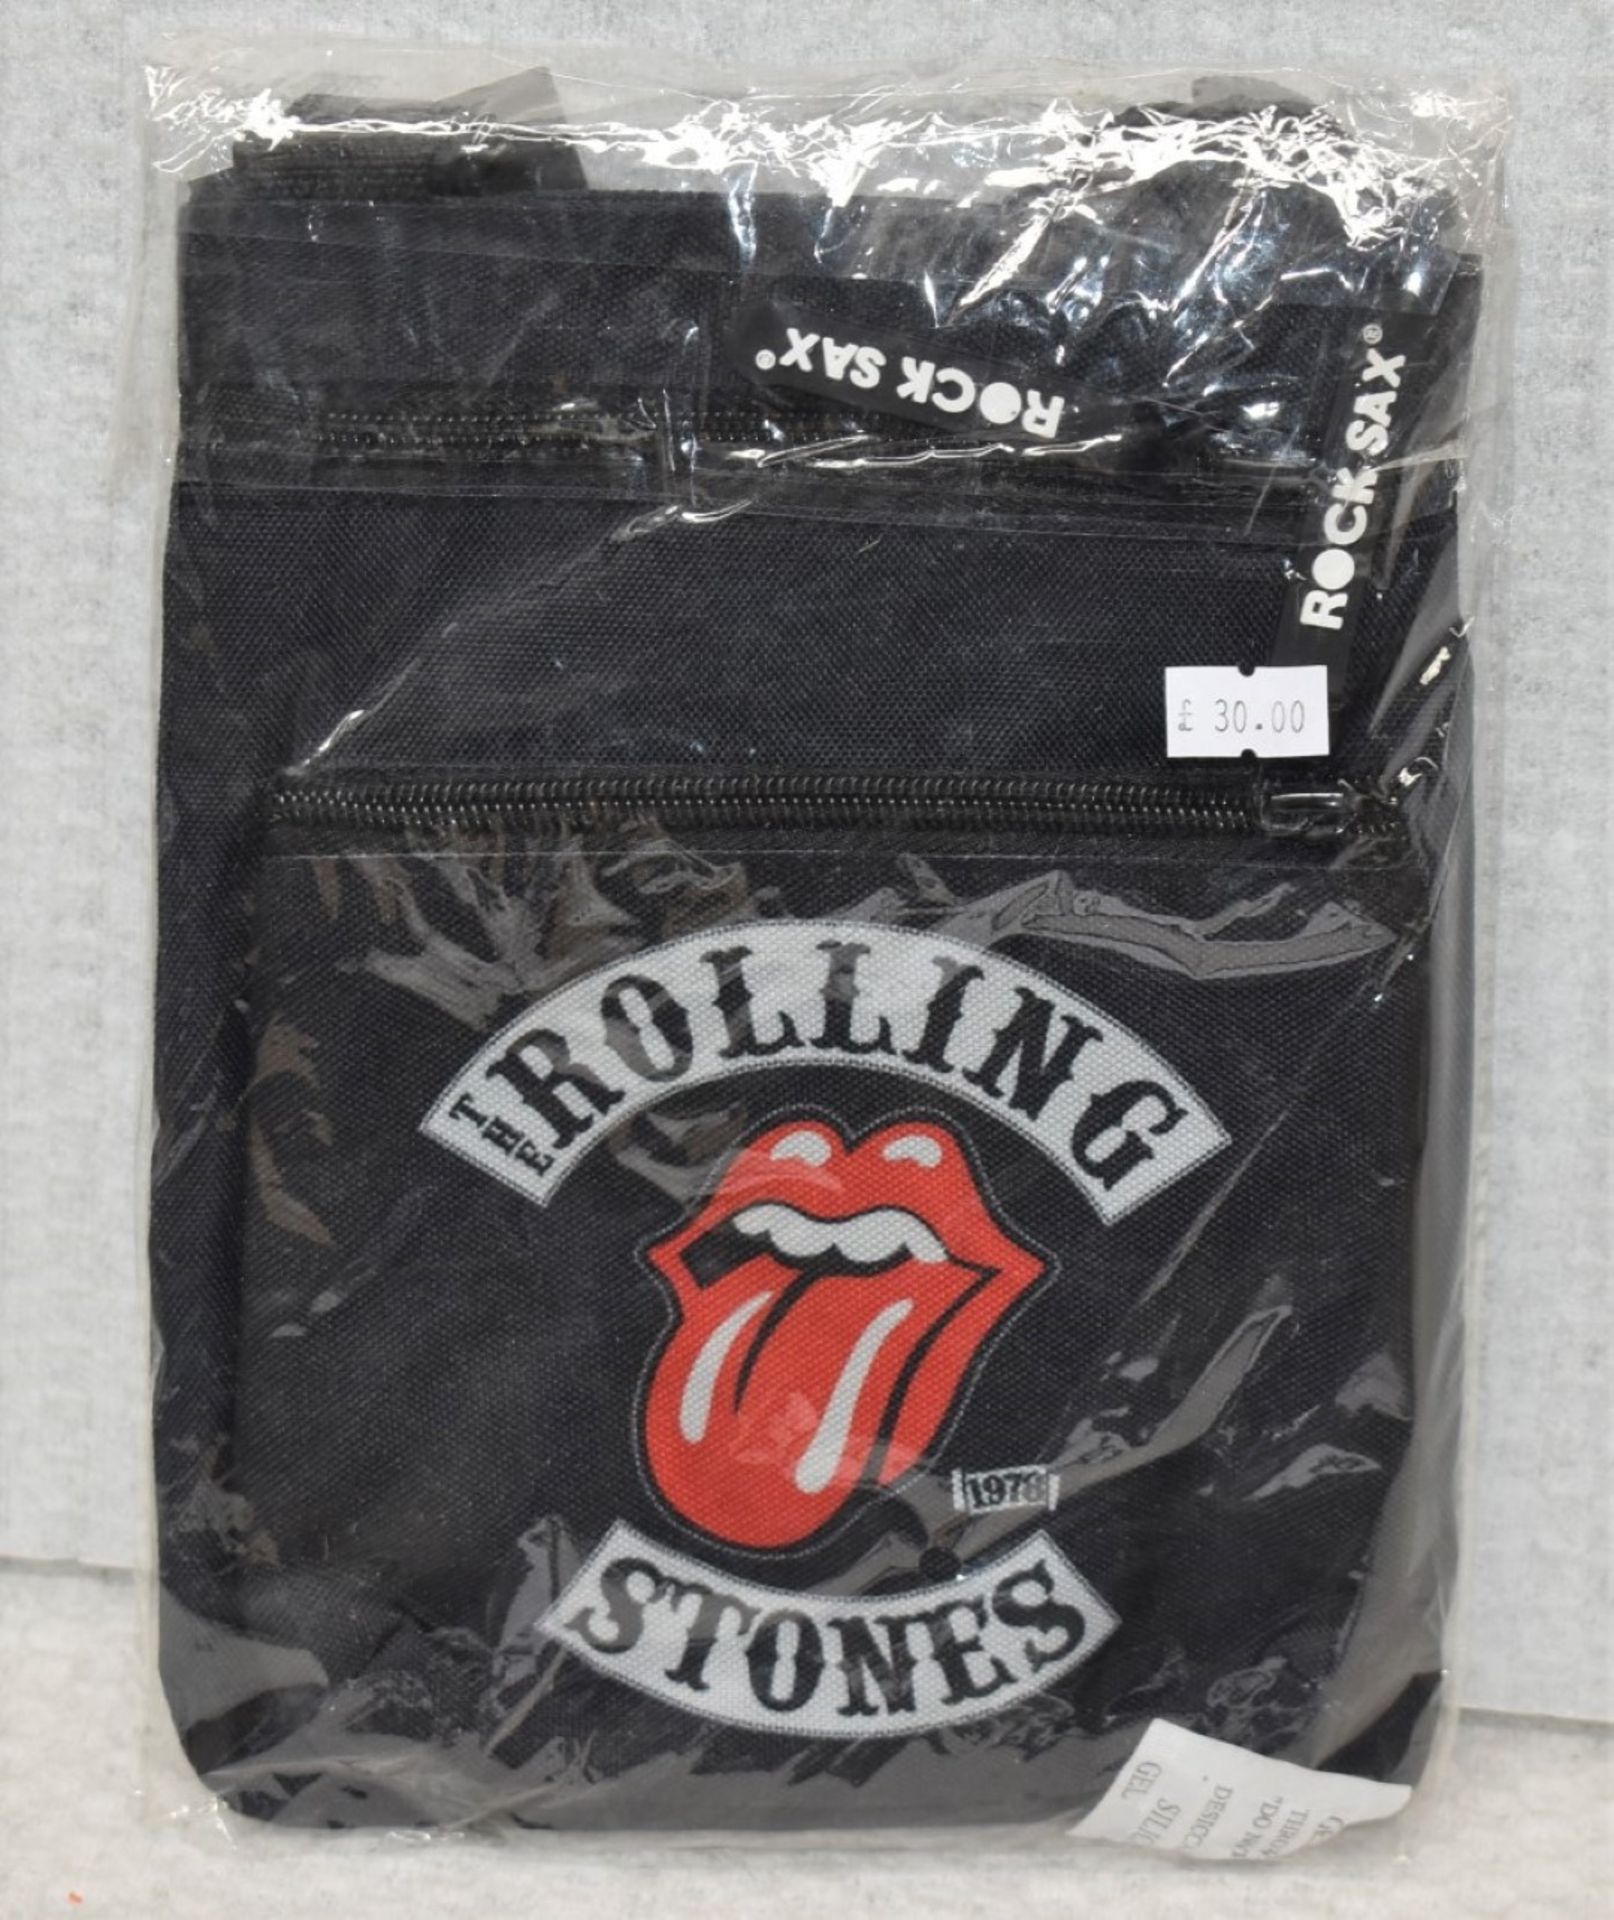 1 x Rolling Stones Cross Body Festival Bag by Rock Sax - Iconic Tongue and Lips Logo - Officially